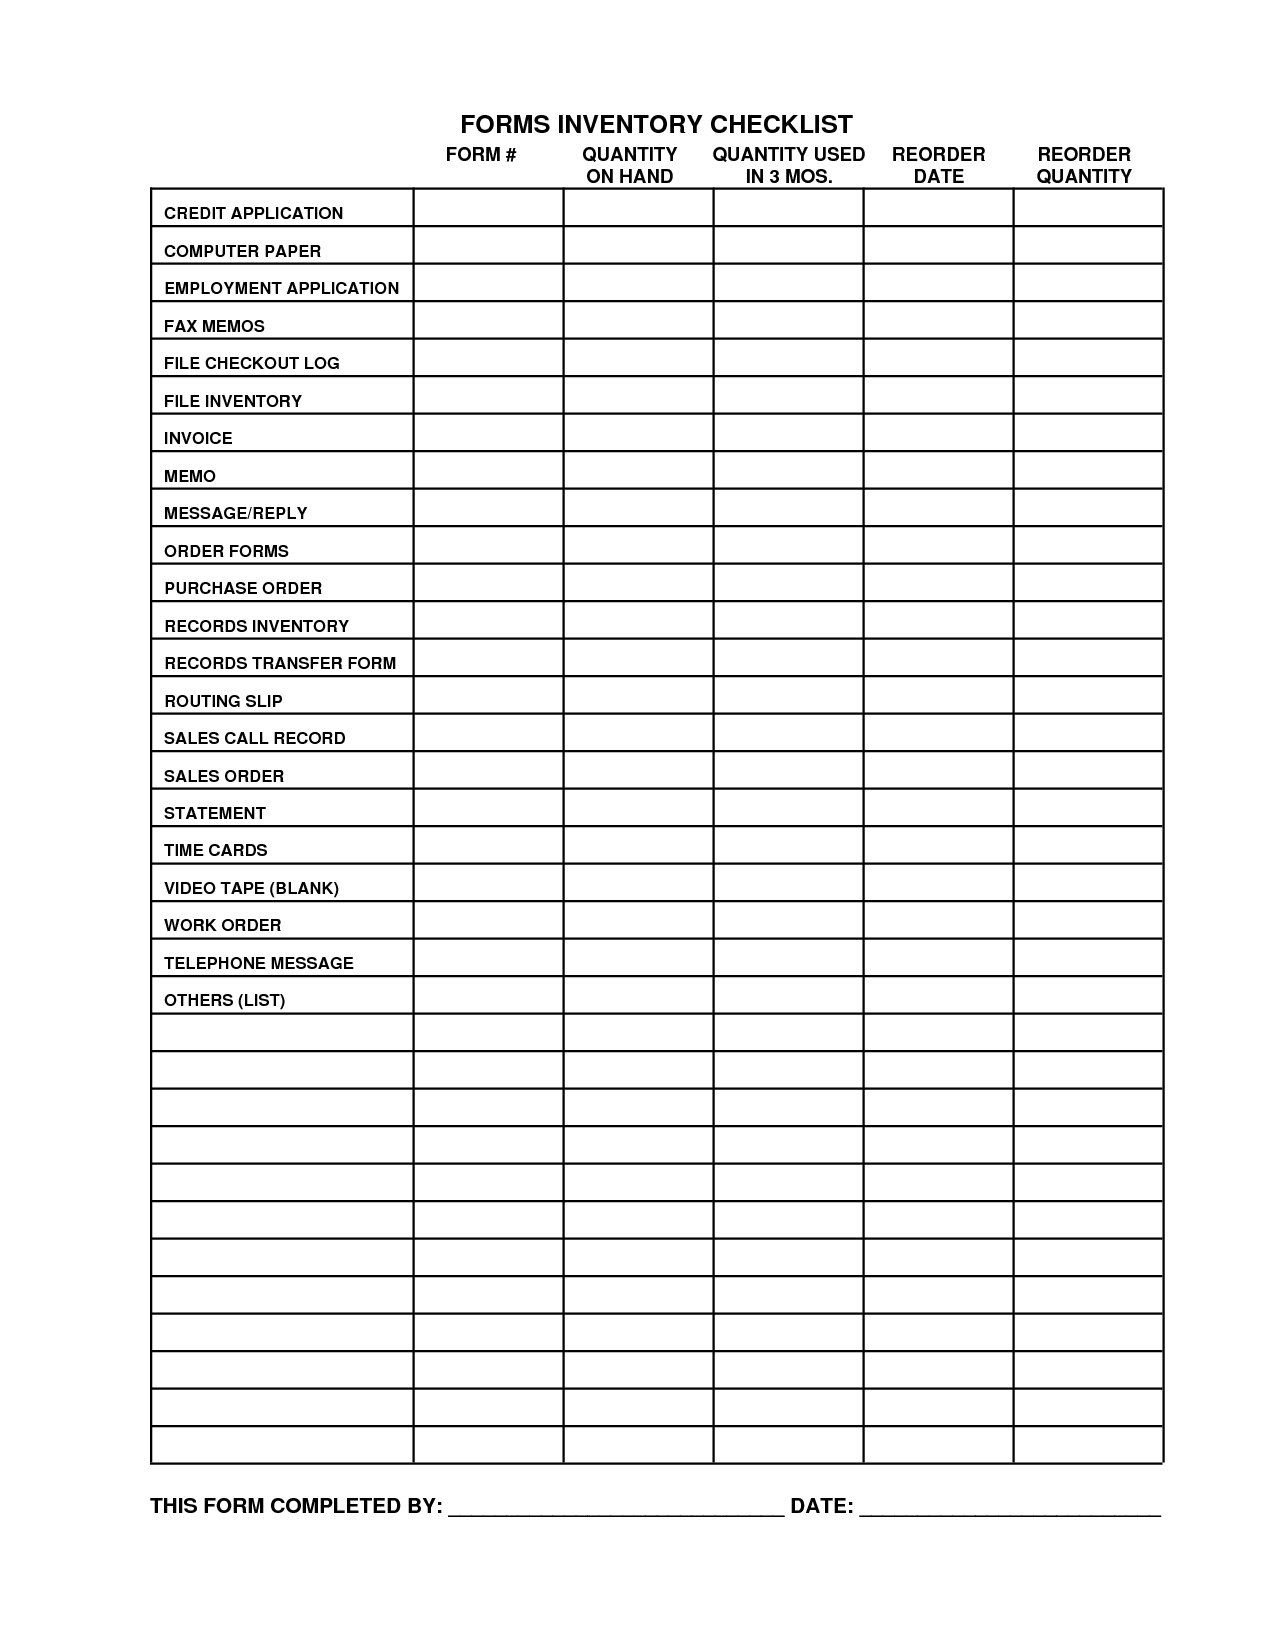 6 Best Images of Printable Inventory List Form - Printable ...